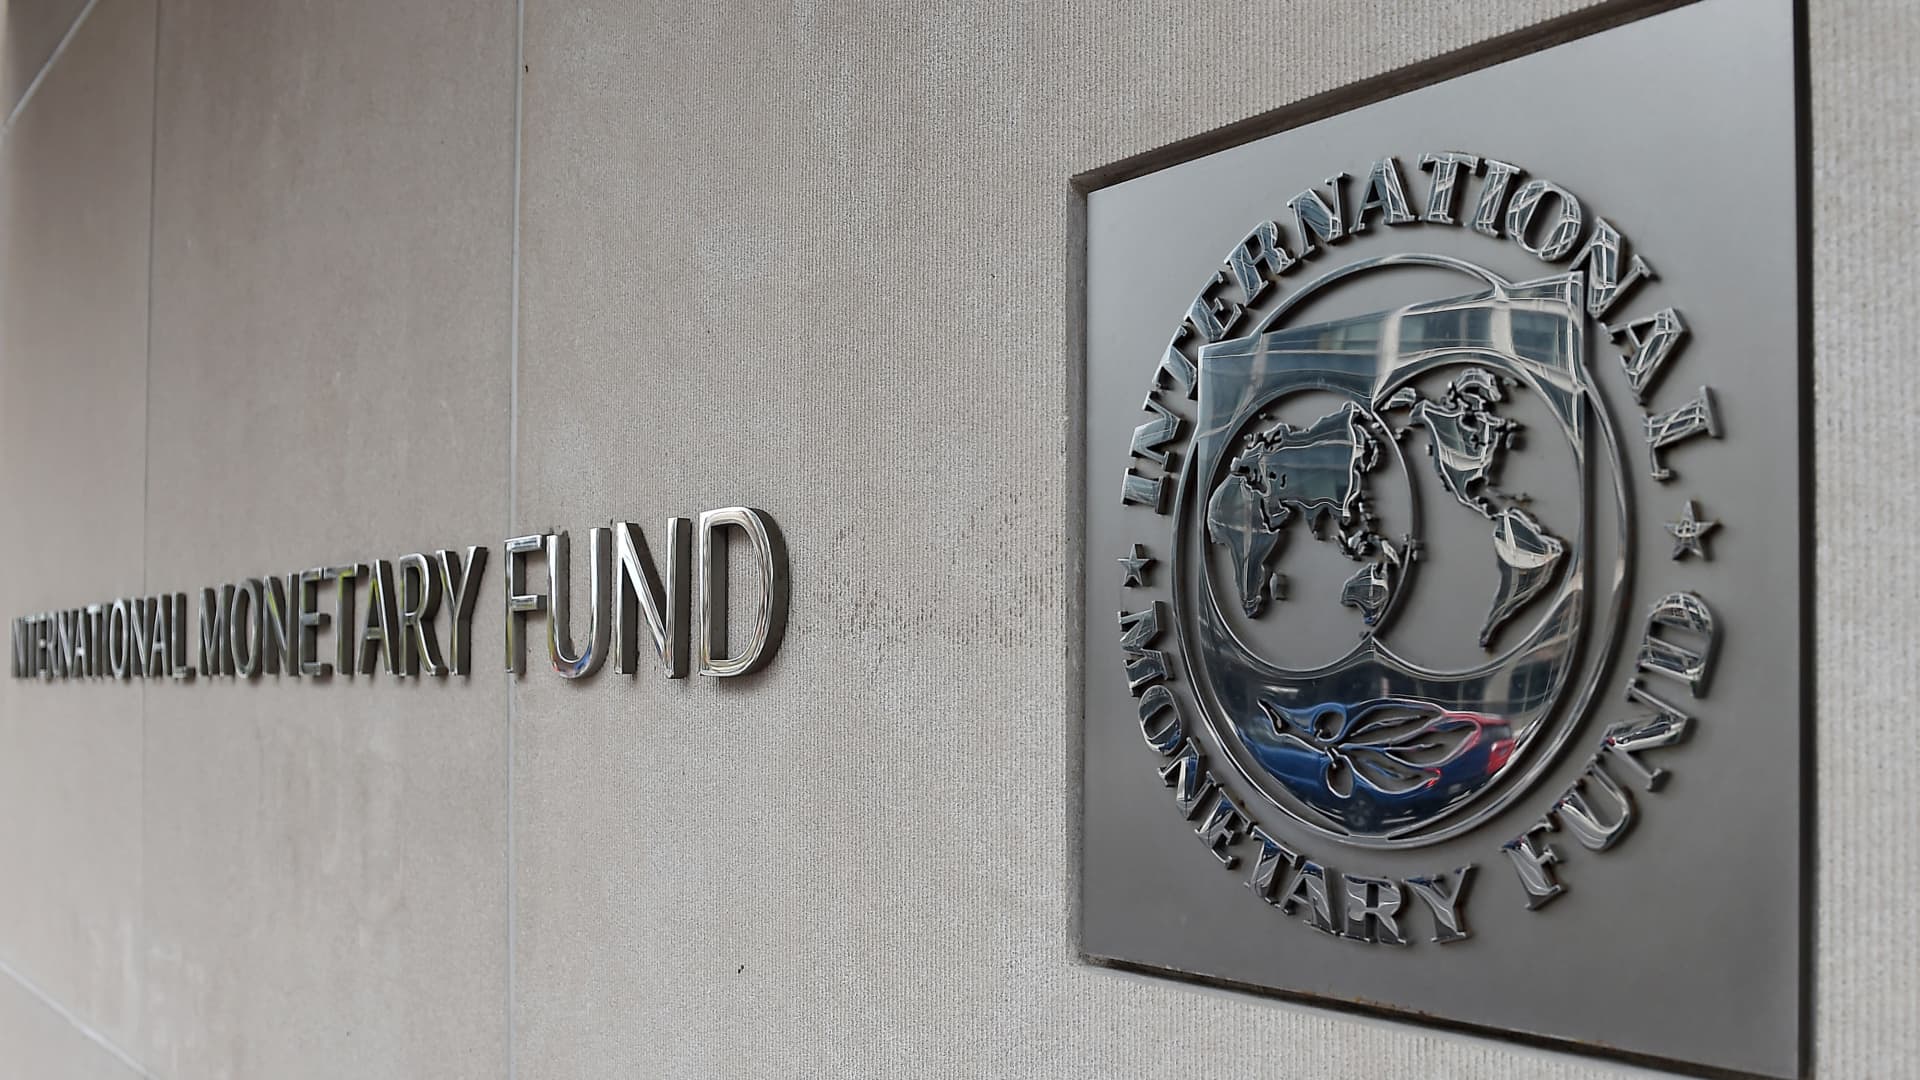 An exterior view of the building of the International Monetary Fund (IMF), with the logo, is seen on March 27, 2020 in Washington, D.C.